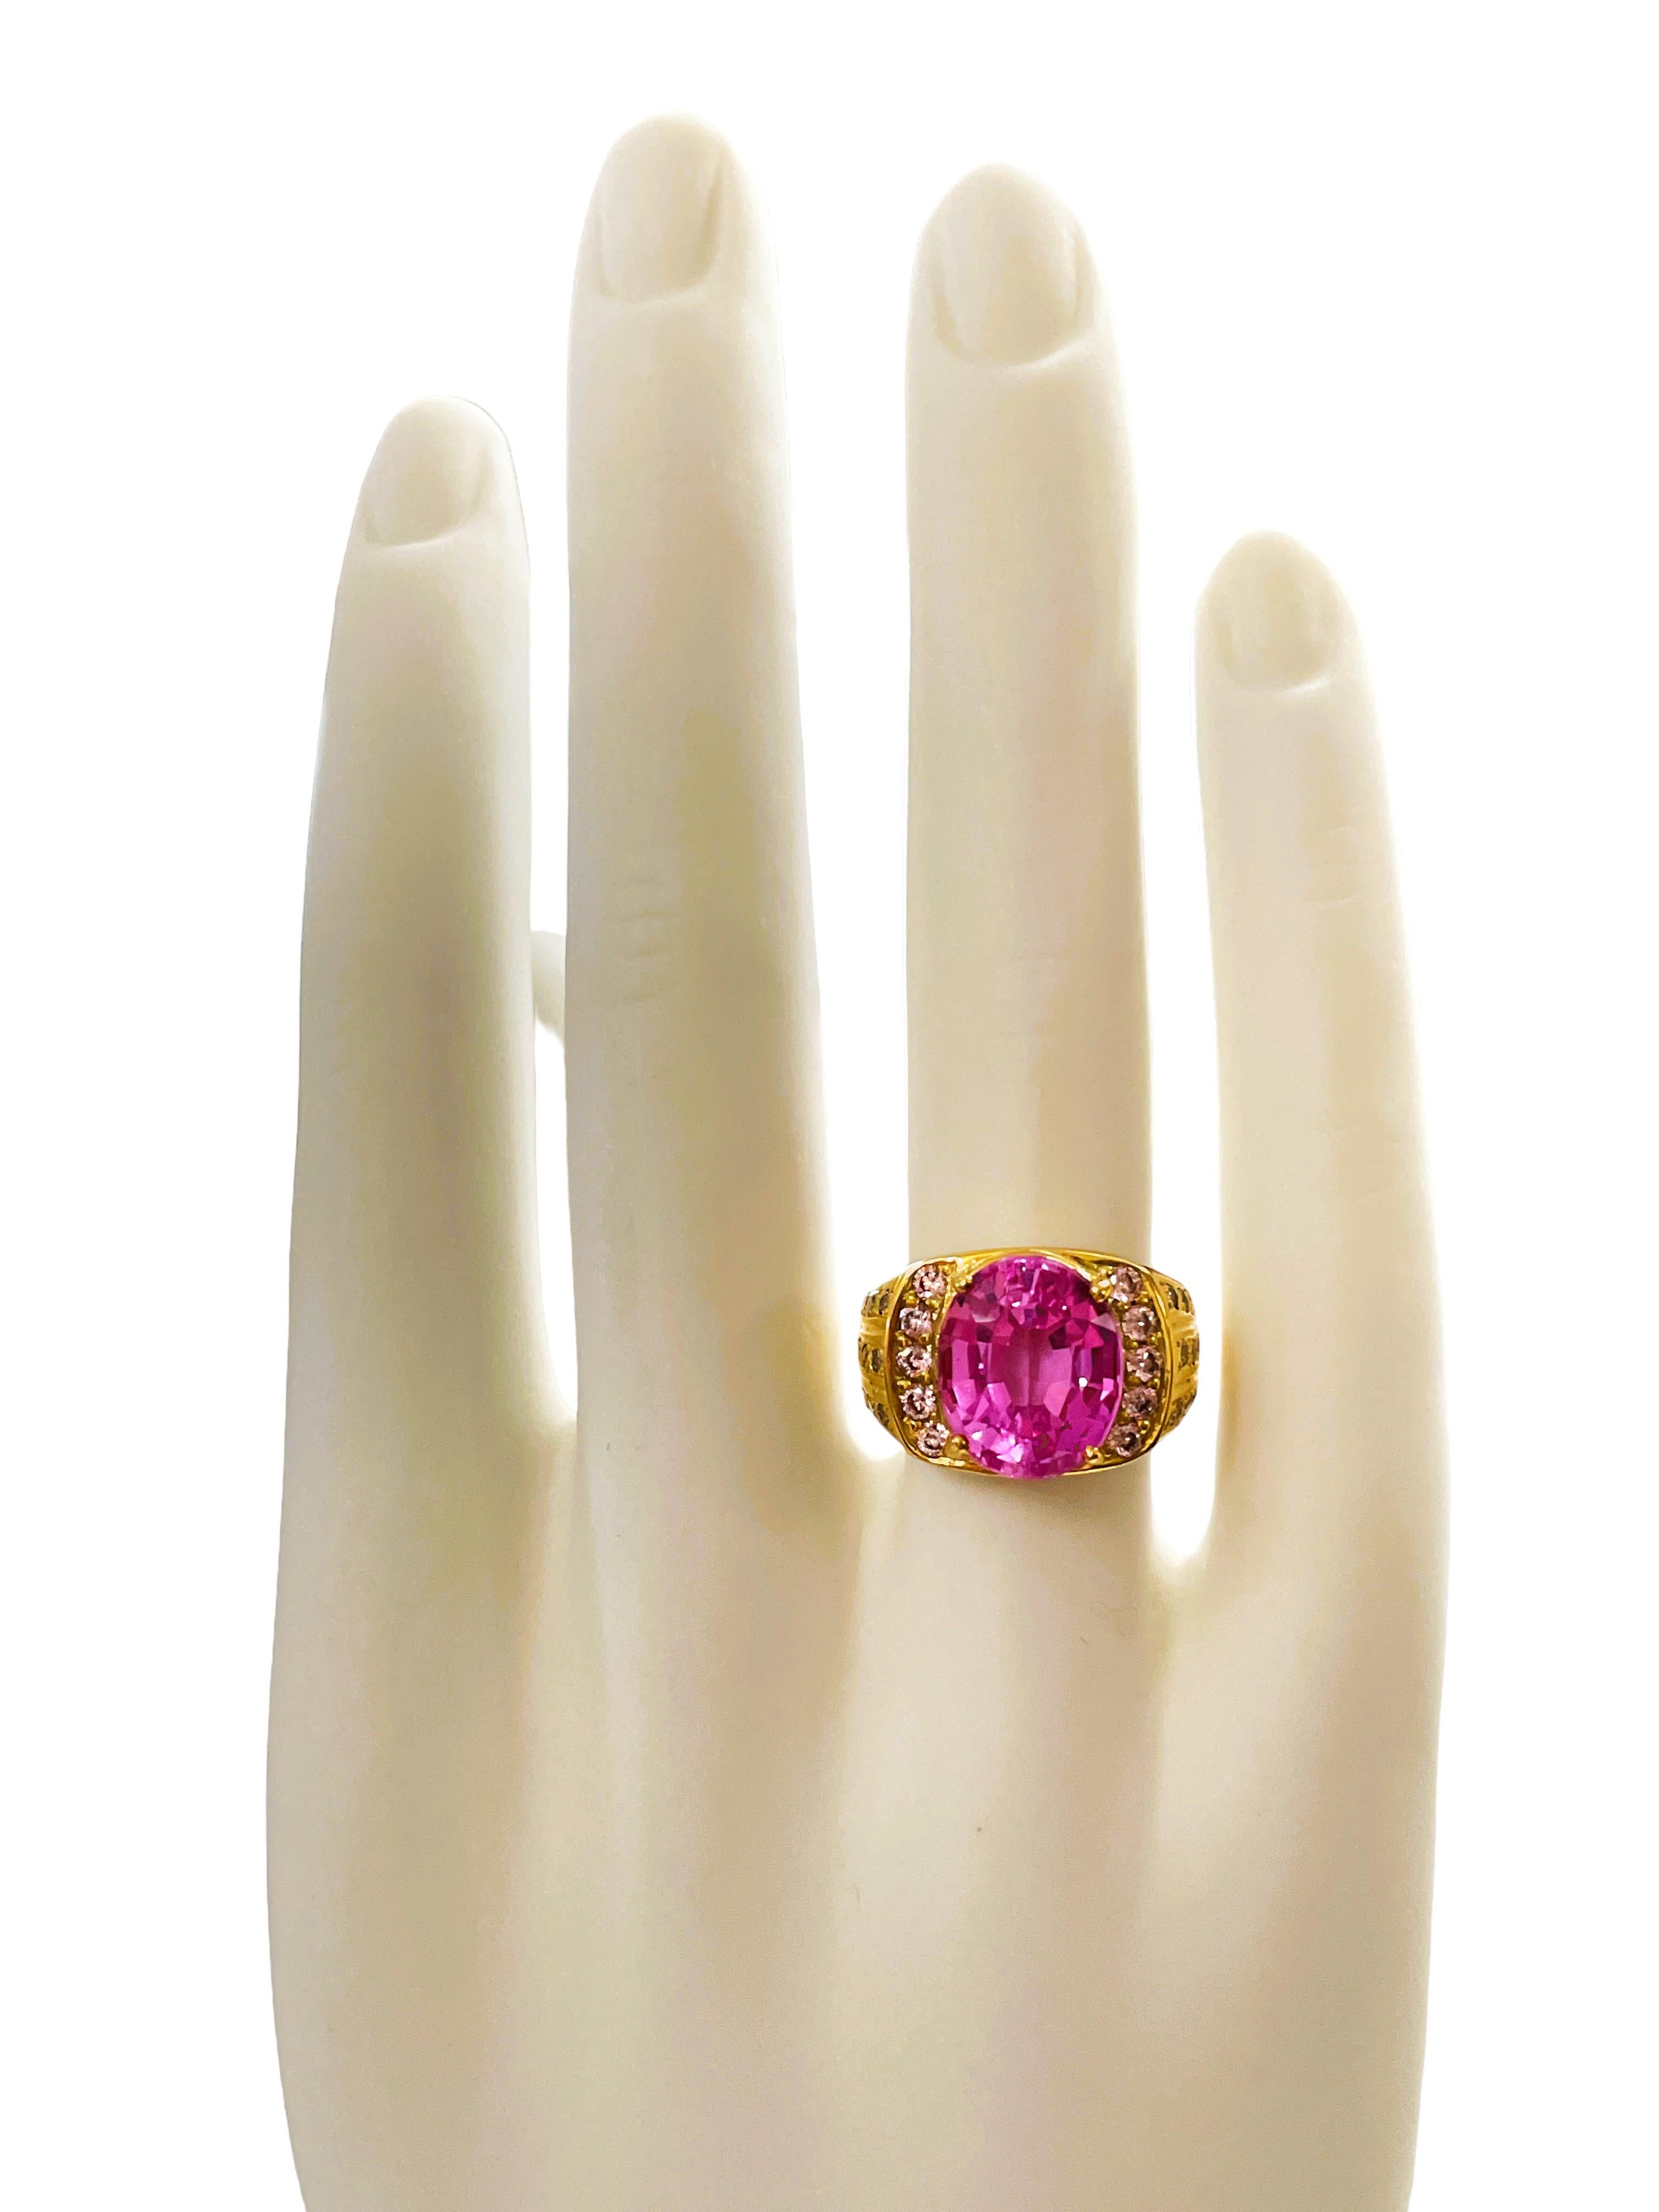 This ring is just  beautiful! The ring is a size 6.25.  The Tourmaline stone was mined in Africa and is exceptional. The 